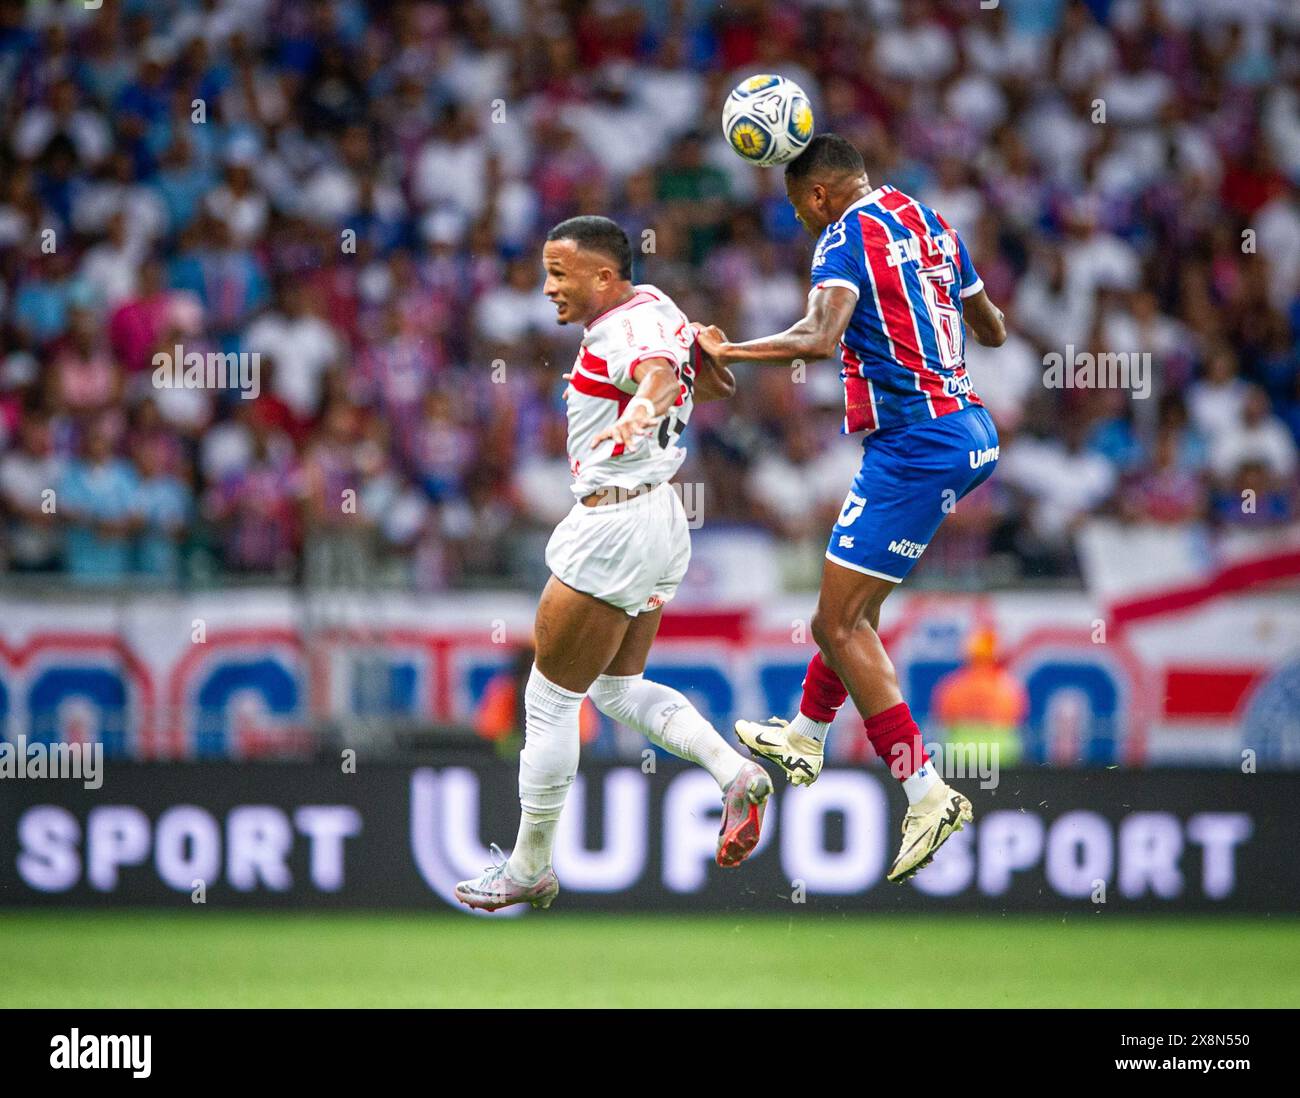 Salvador, Brazil. 26th May, 2024. BA - SALVADOR - 05/26/2024 - COPA DO NORDESTE 2024, BAHIA x CRB - Jean Lucas player from Bahia during a match against CRB at the Arena Fonte Nova stadium for the Copa Do Nordeste 2024 championship. Photo: Jhony Pinho/AGIF Credit: AGIF/Alamy Live News Stock Photo